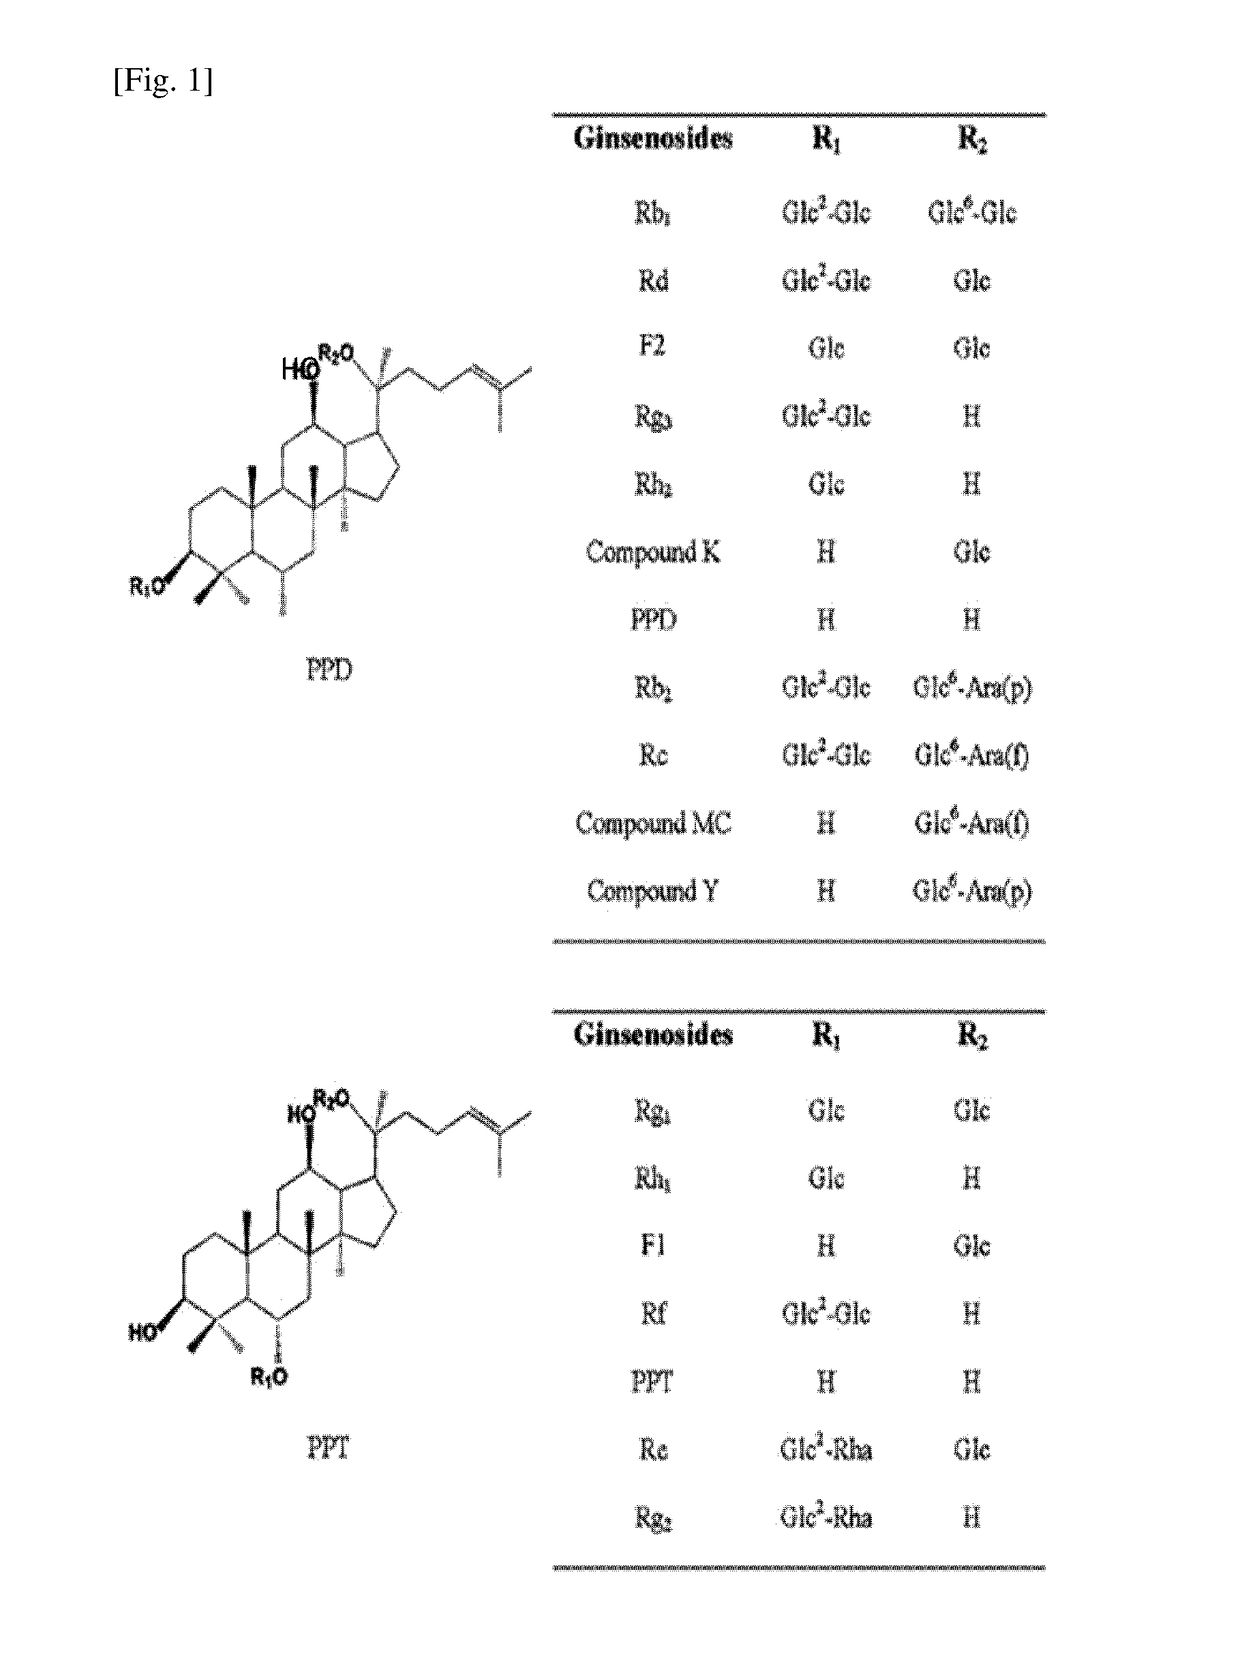 A novel method for glycosylation of ginsenoside using a glycosyltransferase derived from panax ginseng